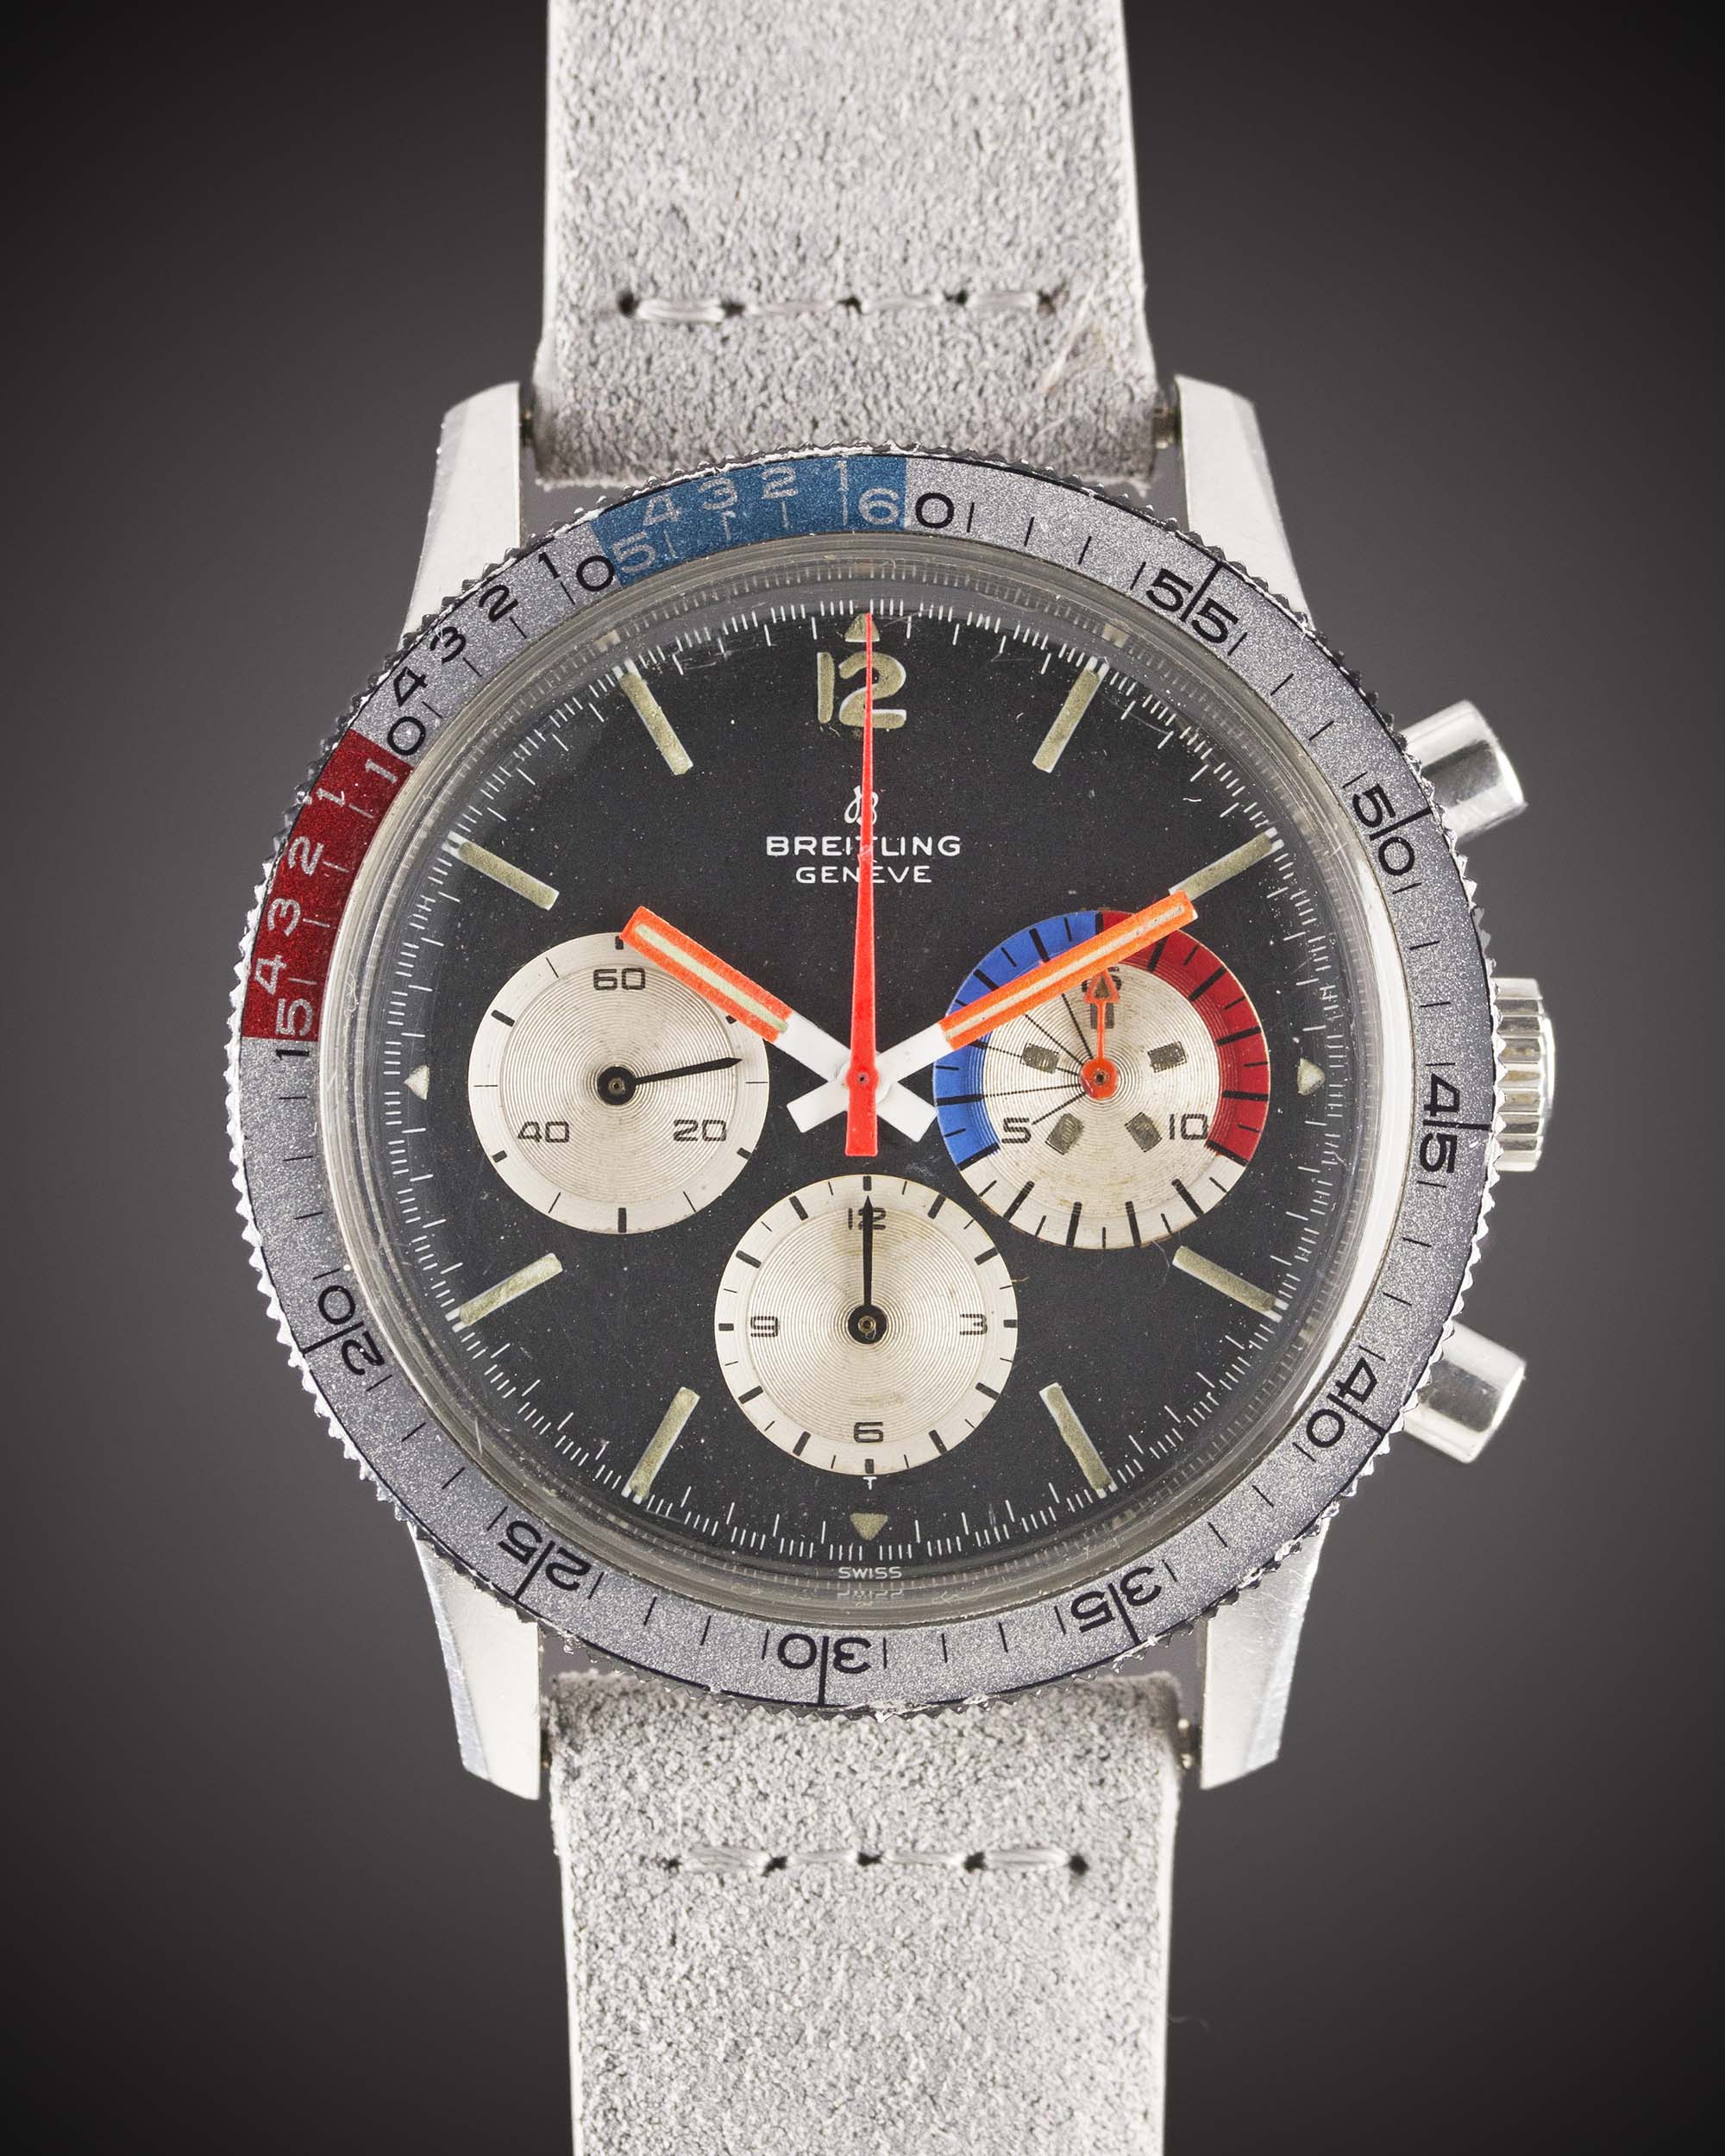 A VERY RARE GENTLEMAN'S STAINLESS STEEL BREITLING "CO PILOT" YACHTING CHRONOGRAPH WRIST WATCH - Image 2 of 11